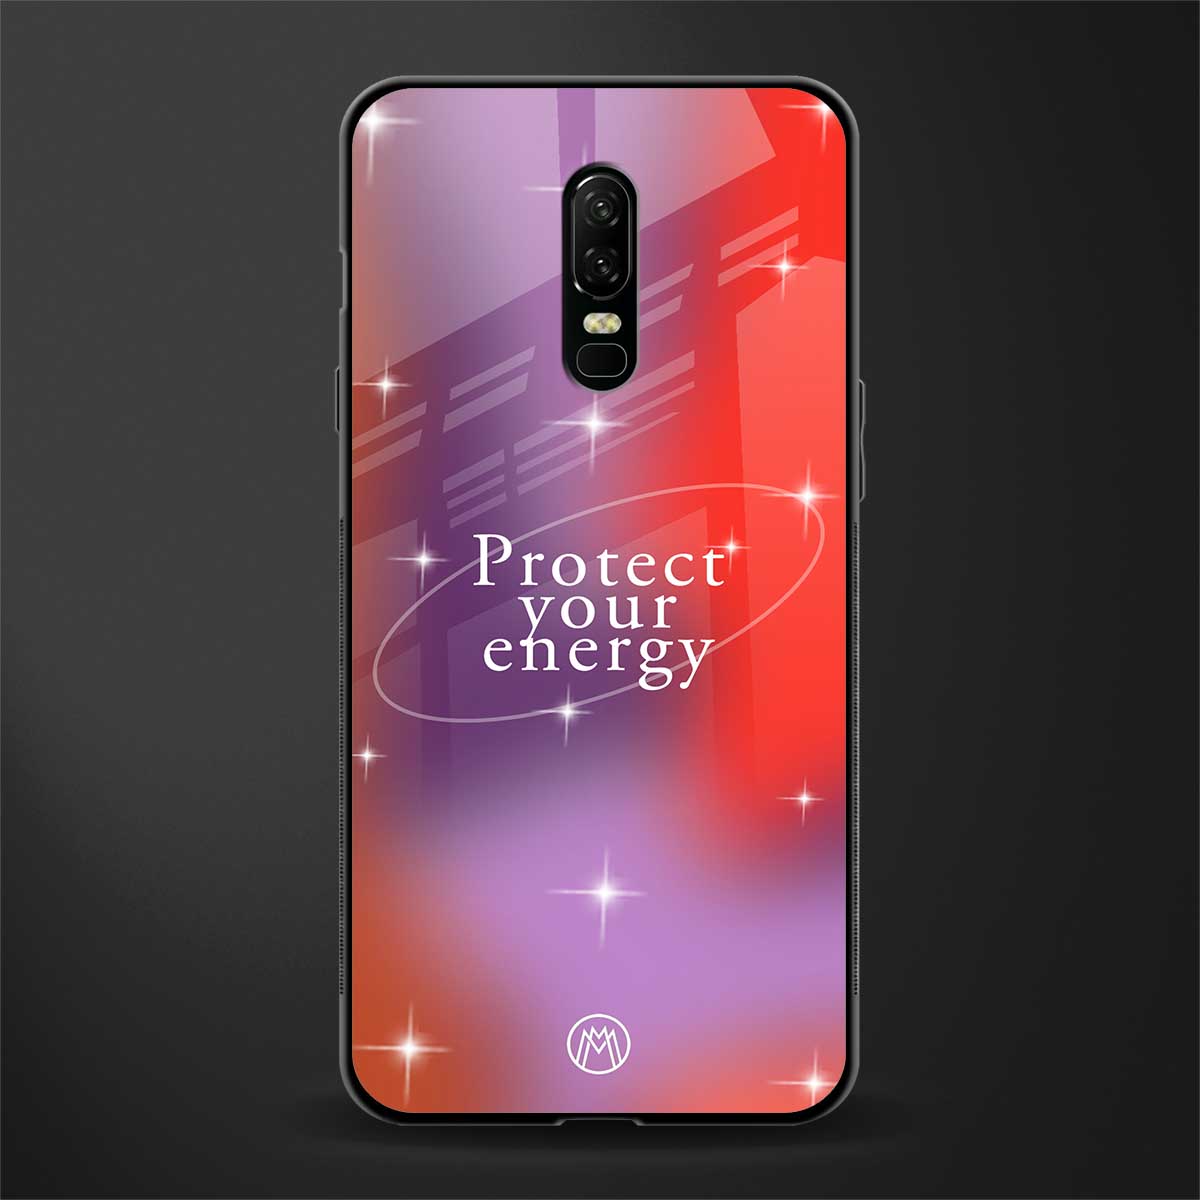 protect your energy glass case for oneplus 6 image